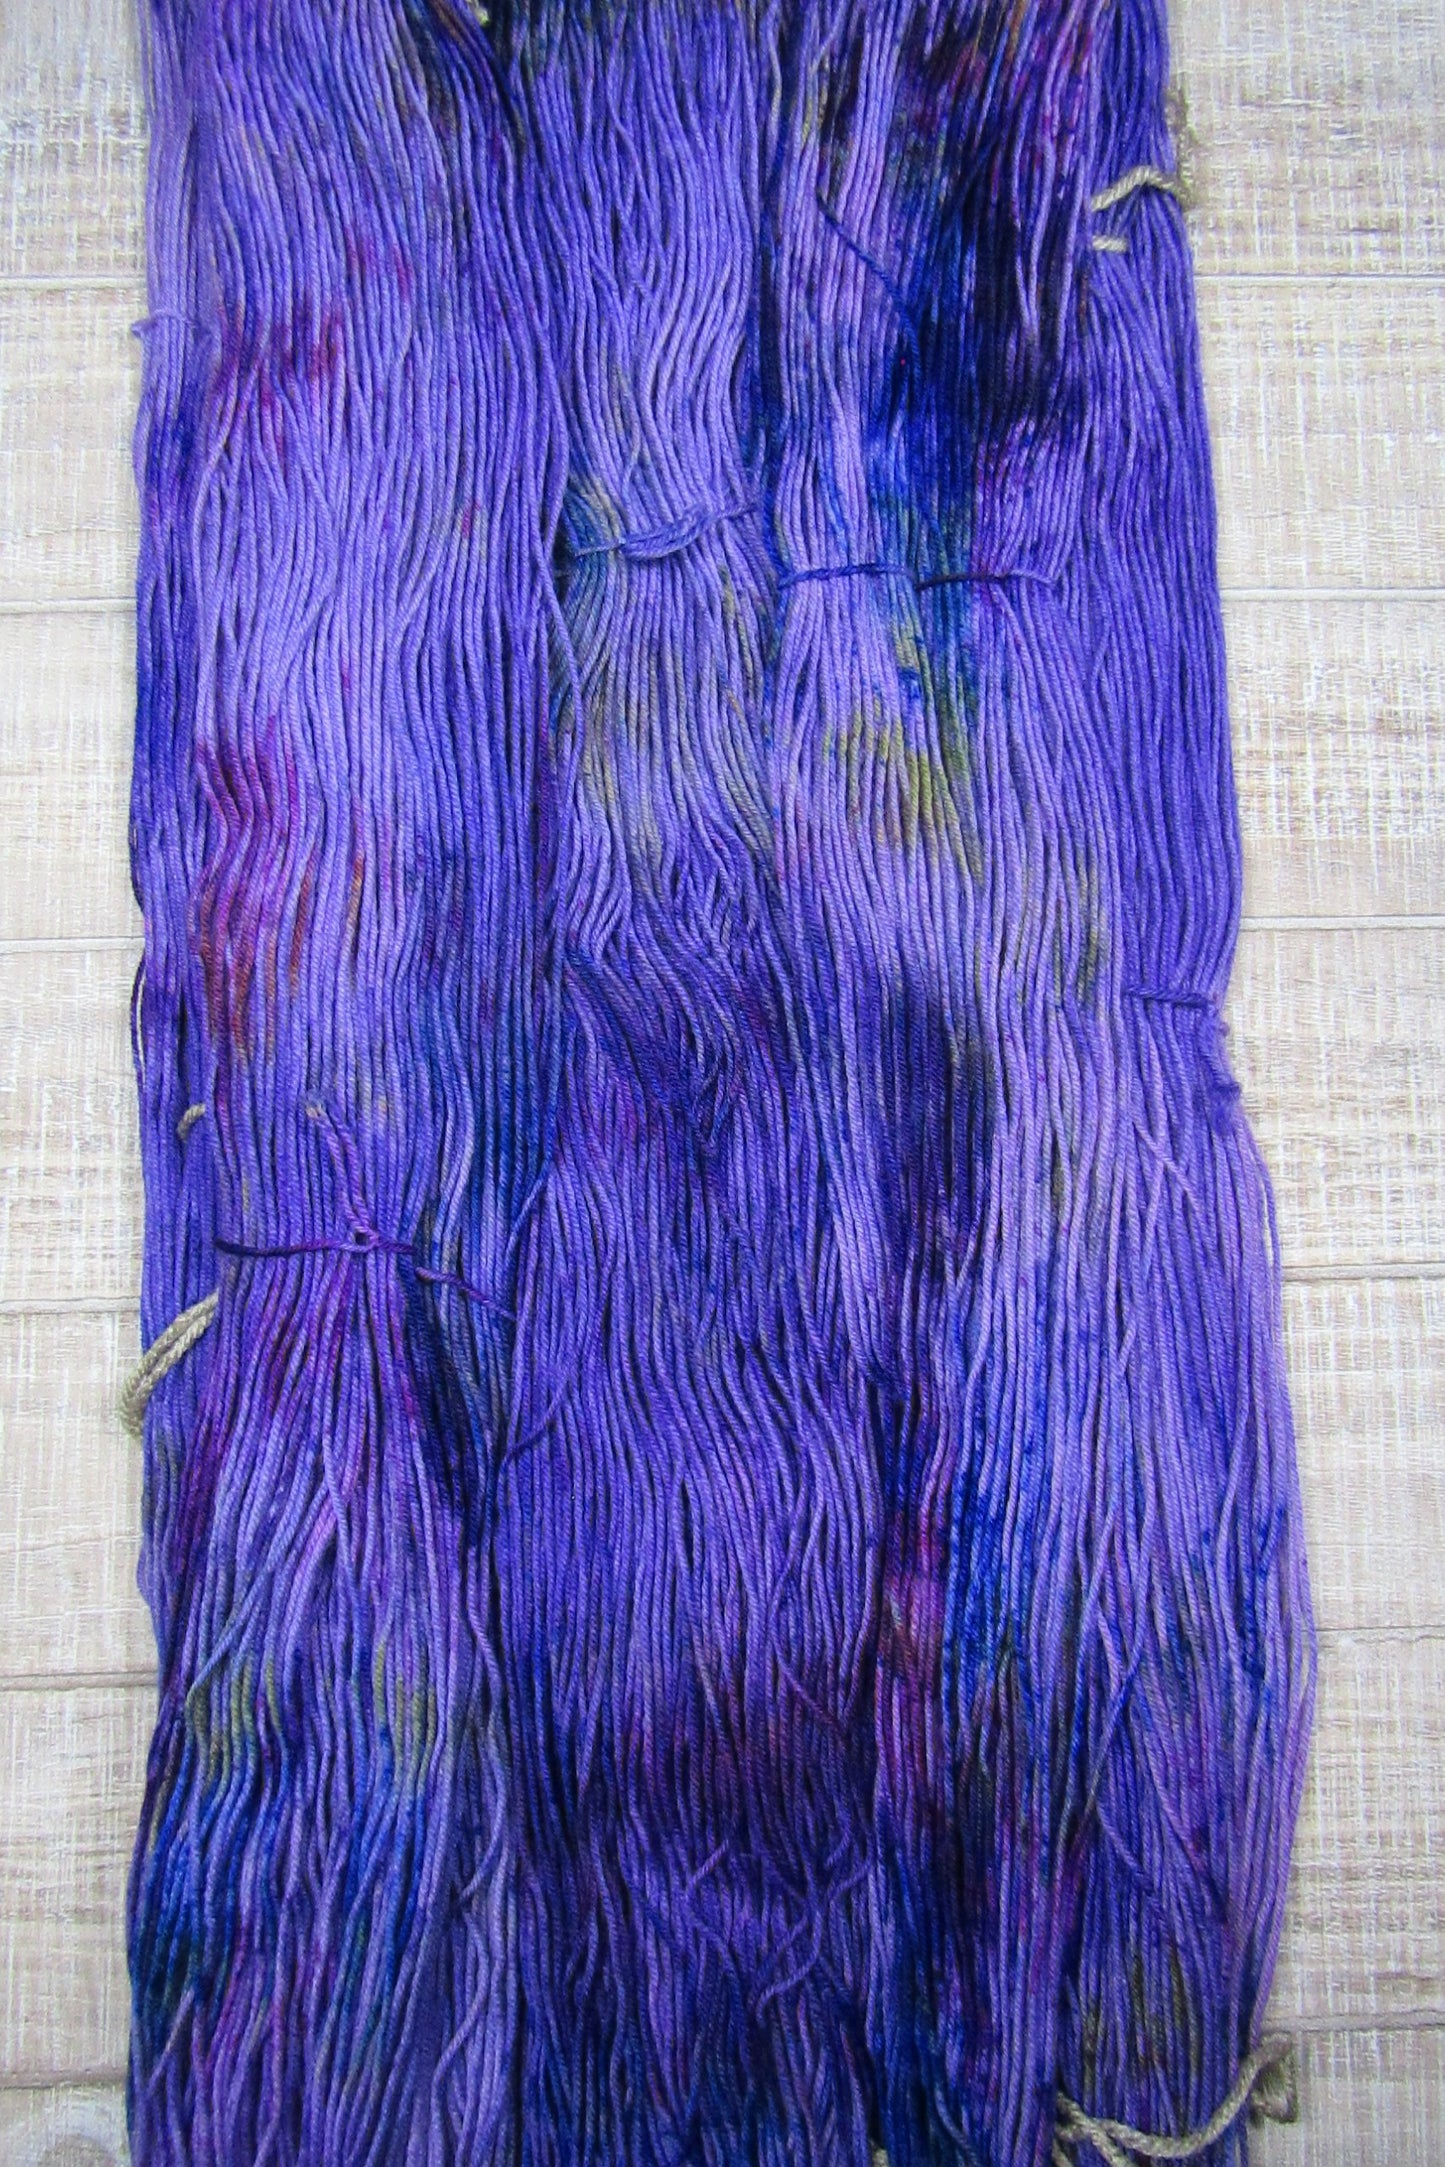 Hand-Dyed Yarn Galileo in a color of purple with areas of blue, yellow, brown, purple, and fuschia.